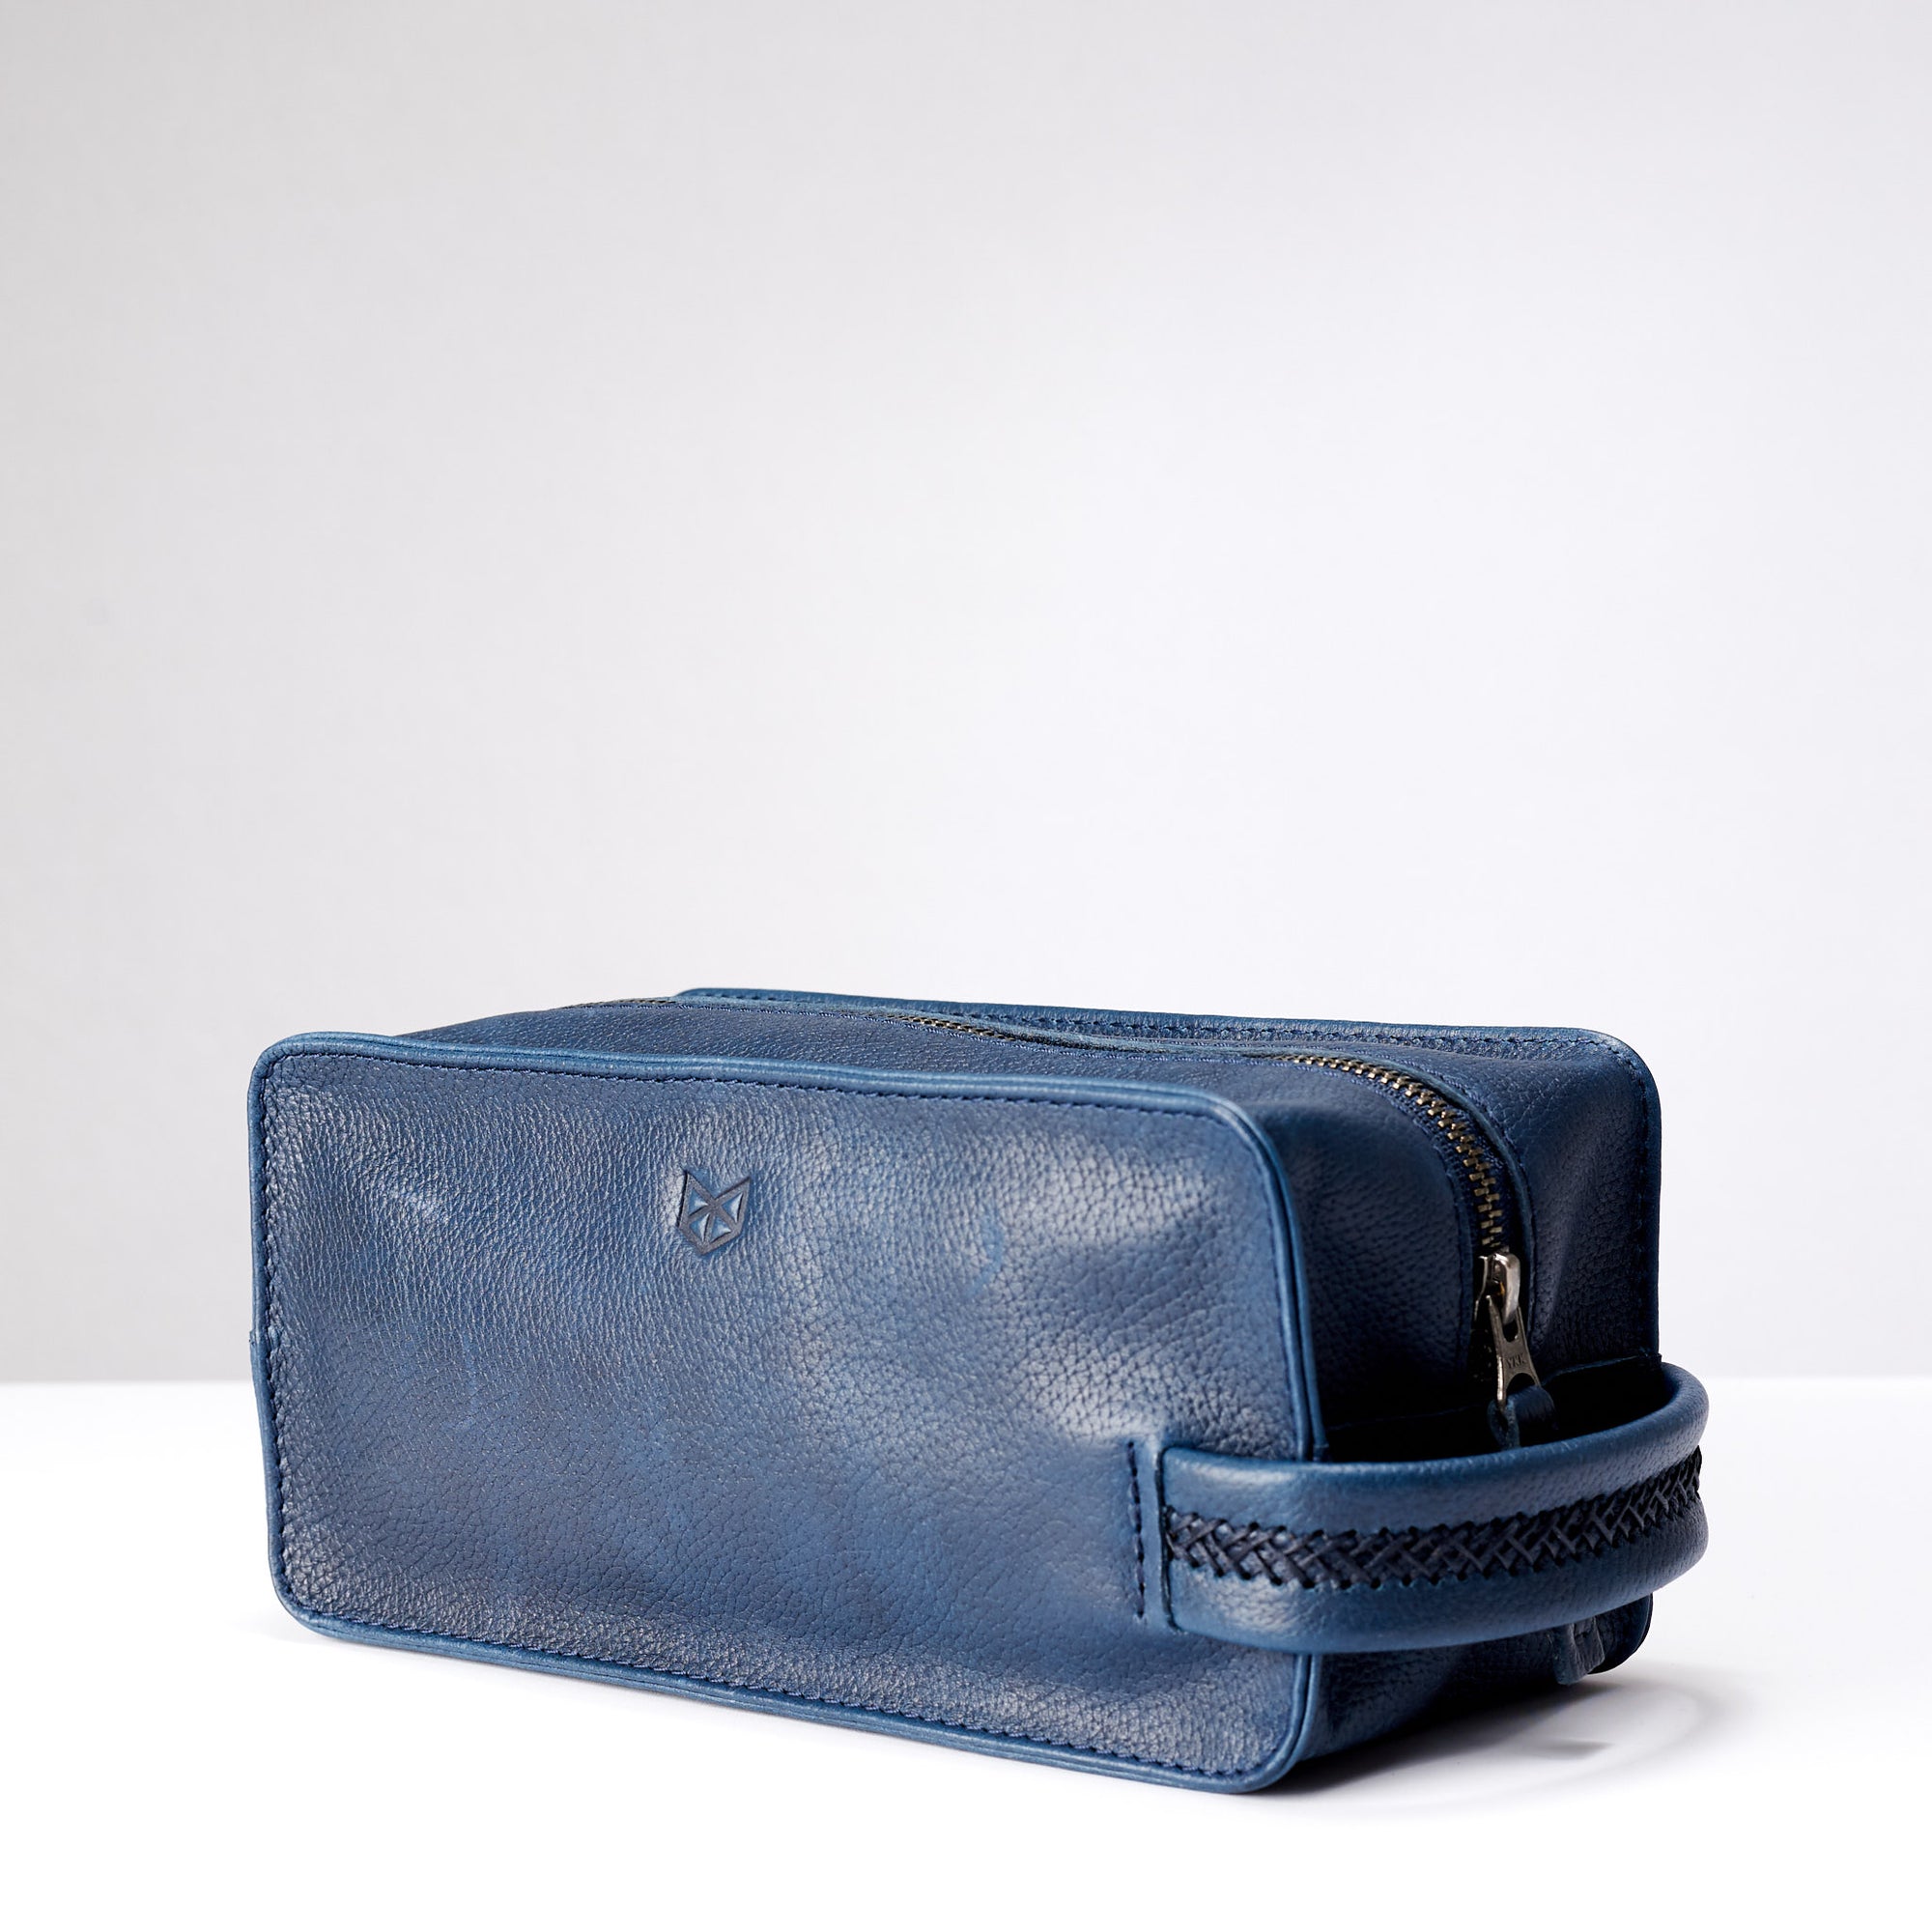 Sided. Ocean blue leather toiletry, shaving bag with hand stitched handle. Groomsmen gifts. Leather good crafted by Capra Leather 